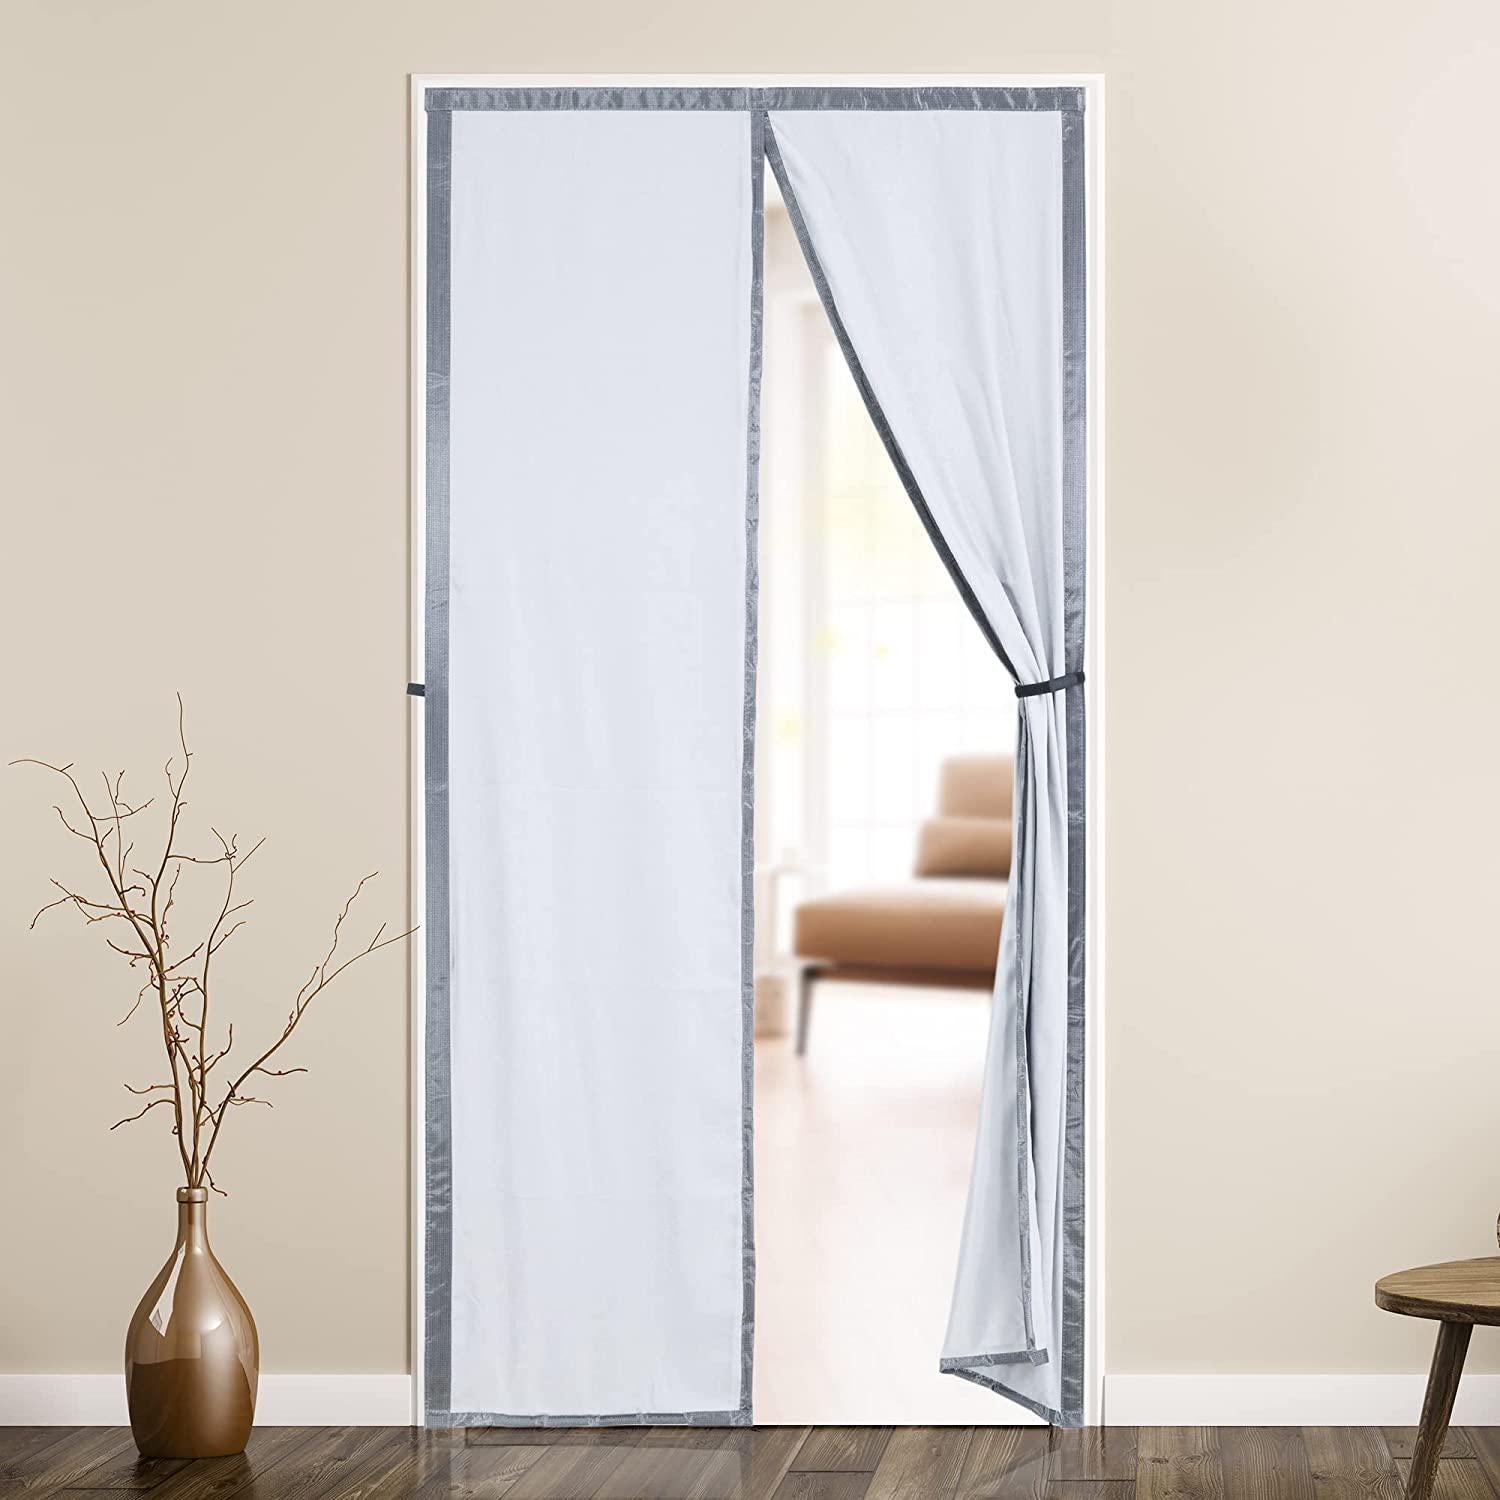 Mpmedo, Magnetic Insulated Door Curtain,Upgraded Thick Thermal Fabric Cover,Self-Closing Privacy Temporary Door Insulation Cover,Keep Draft Out for Air Conditioner Room, Heater Room, Living Room,Back Door